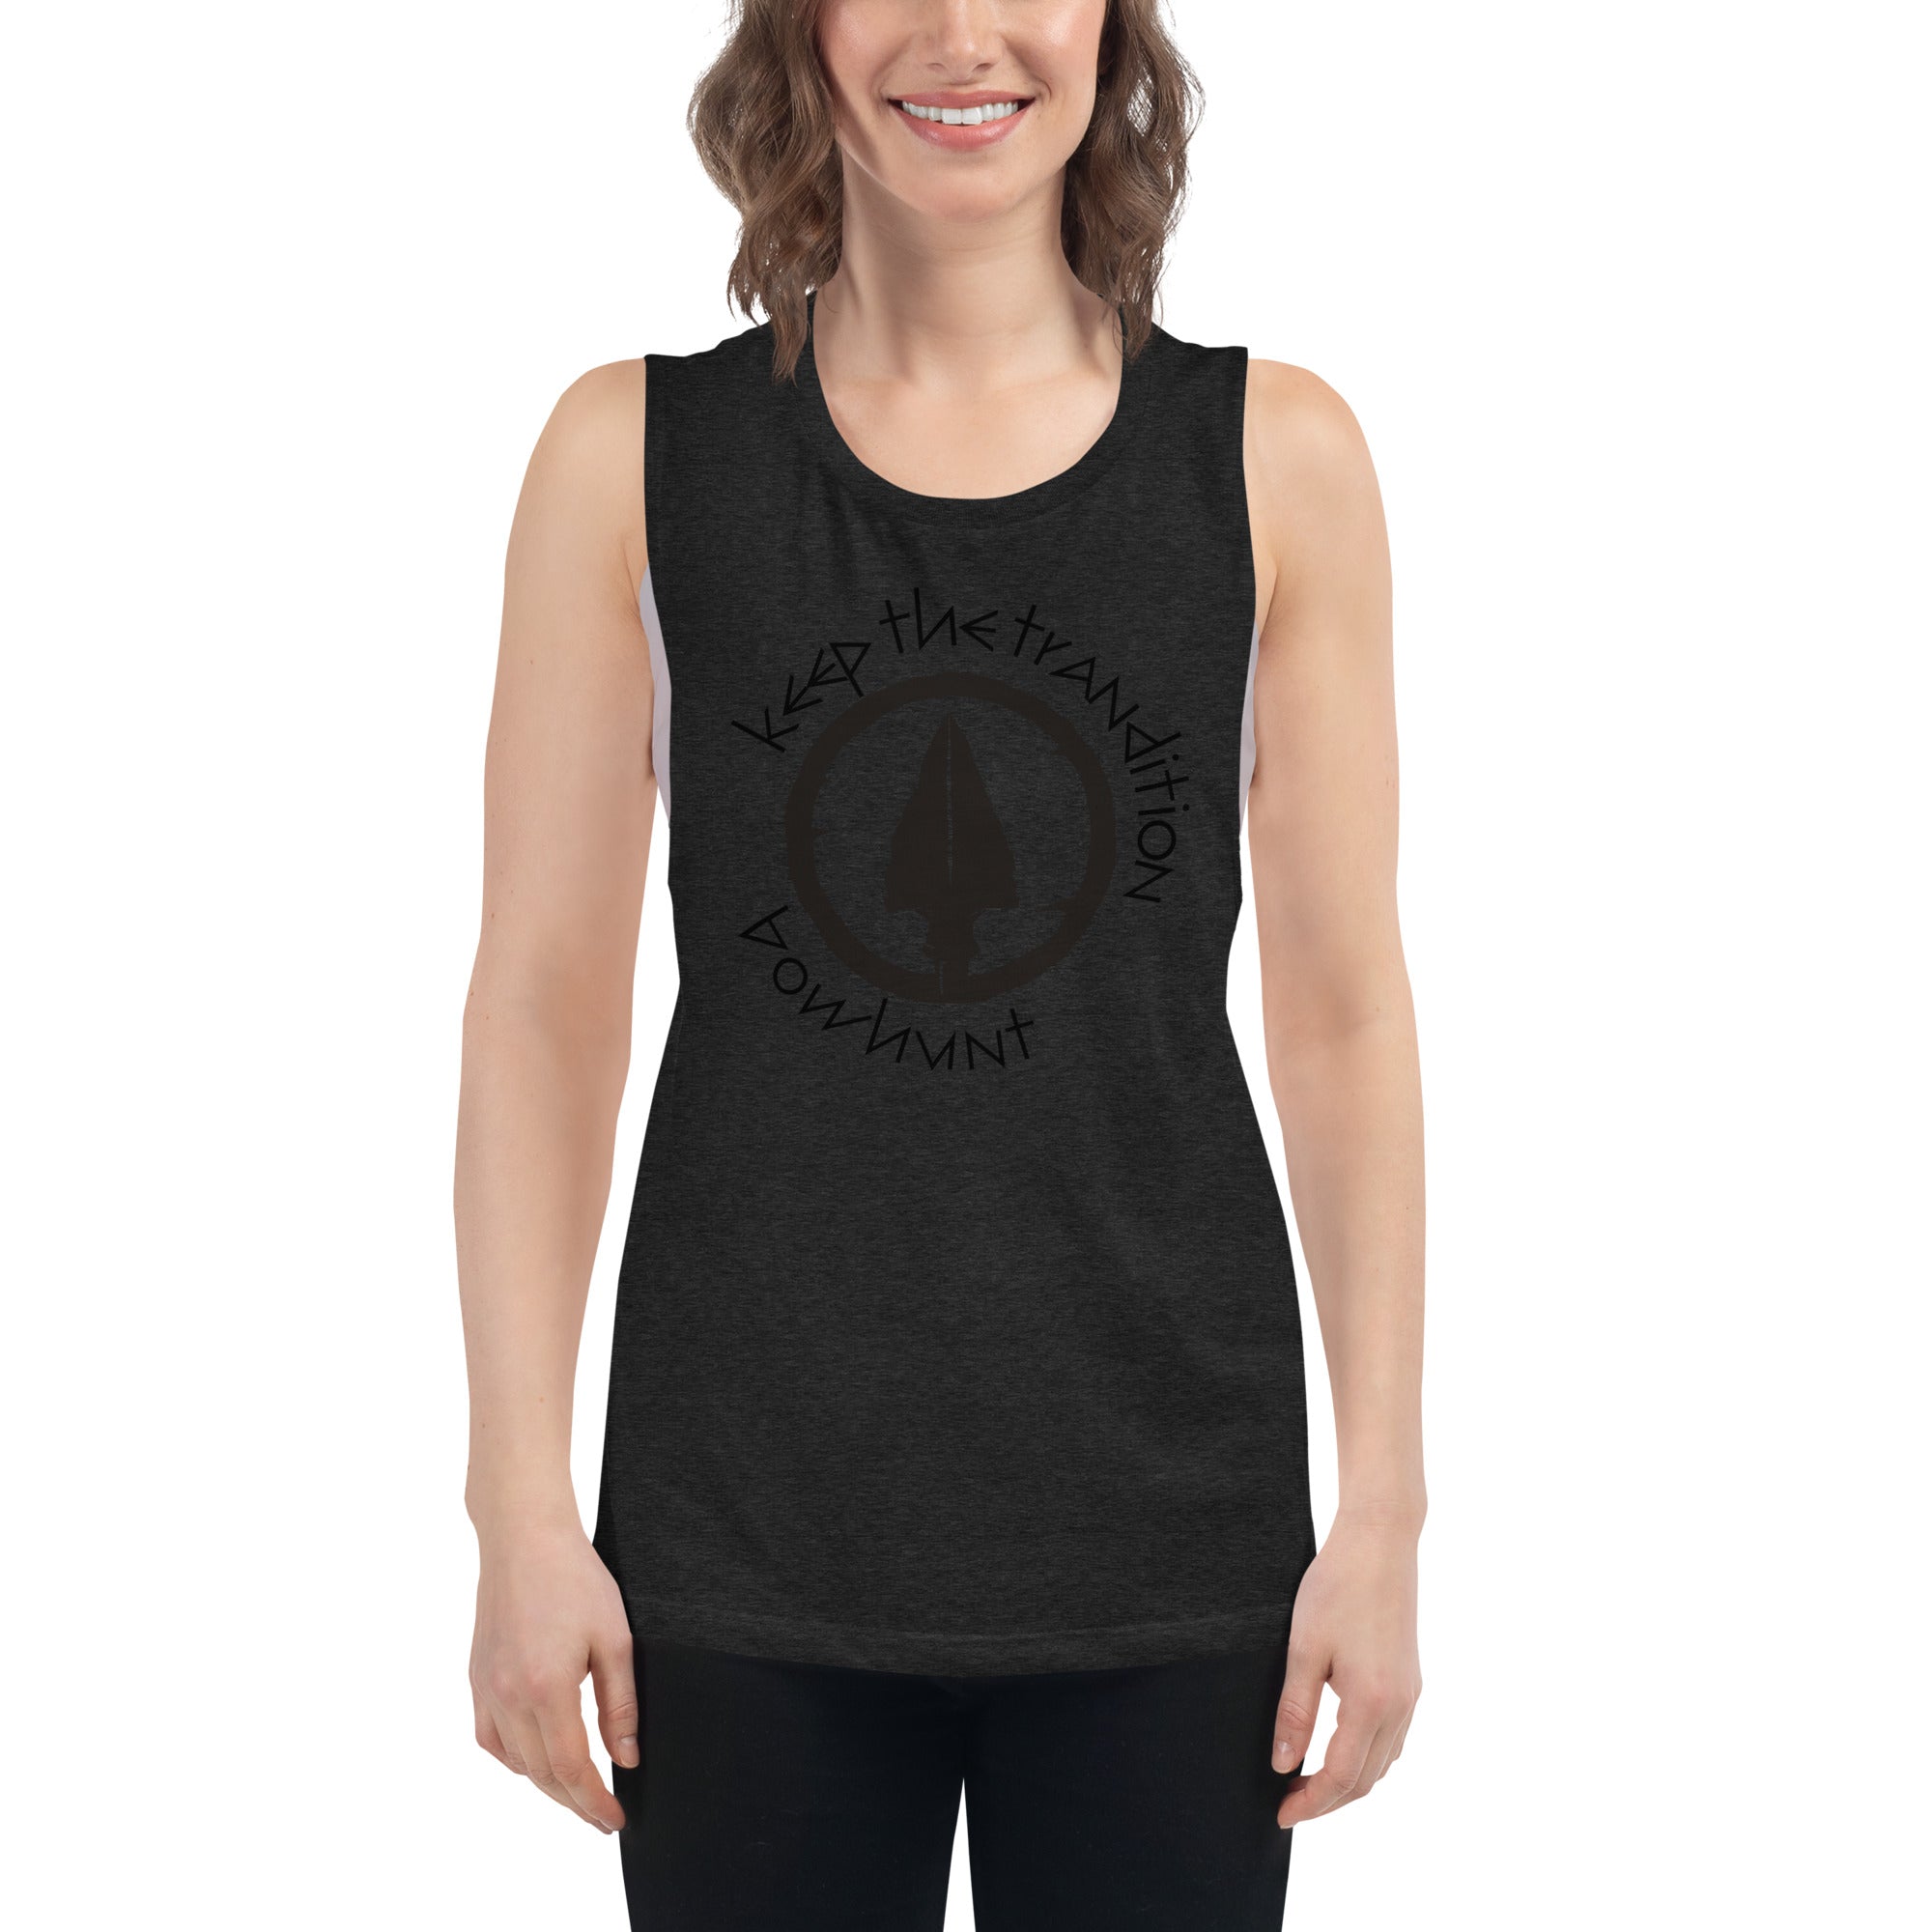 Keep The Tradition Women's Muscle Tank - Bow Hunt